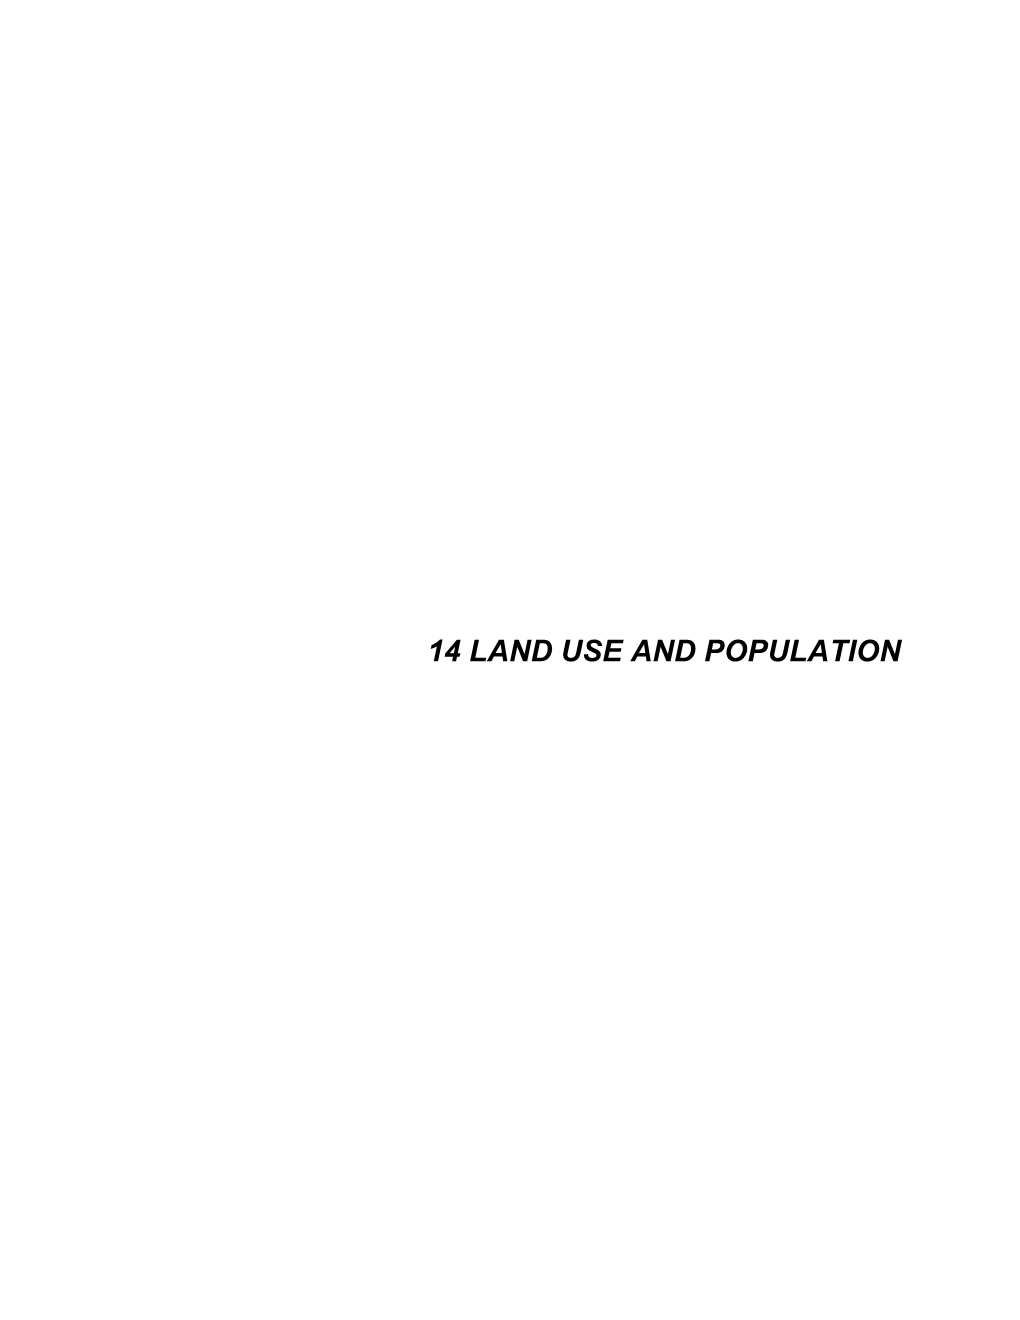 14 Land Use and Population